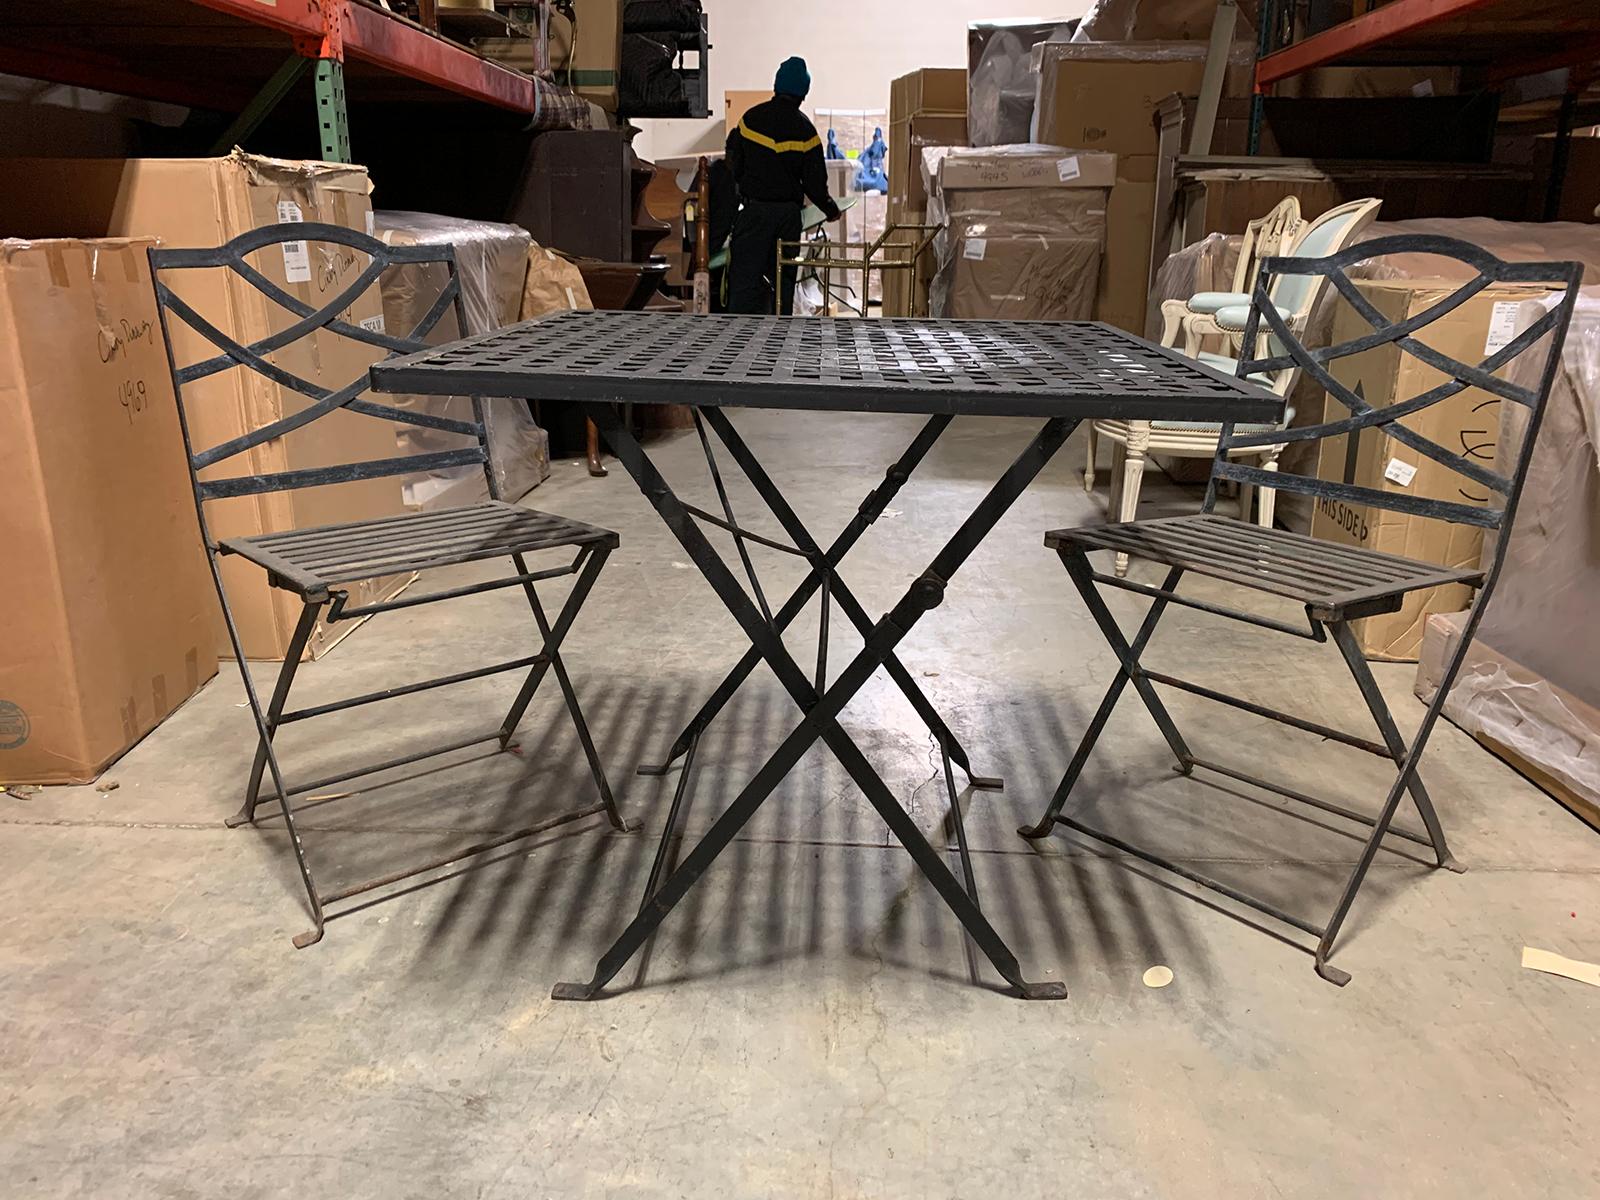 20th century black metal folding breakfast table and chairs
Measures: Table: 33